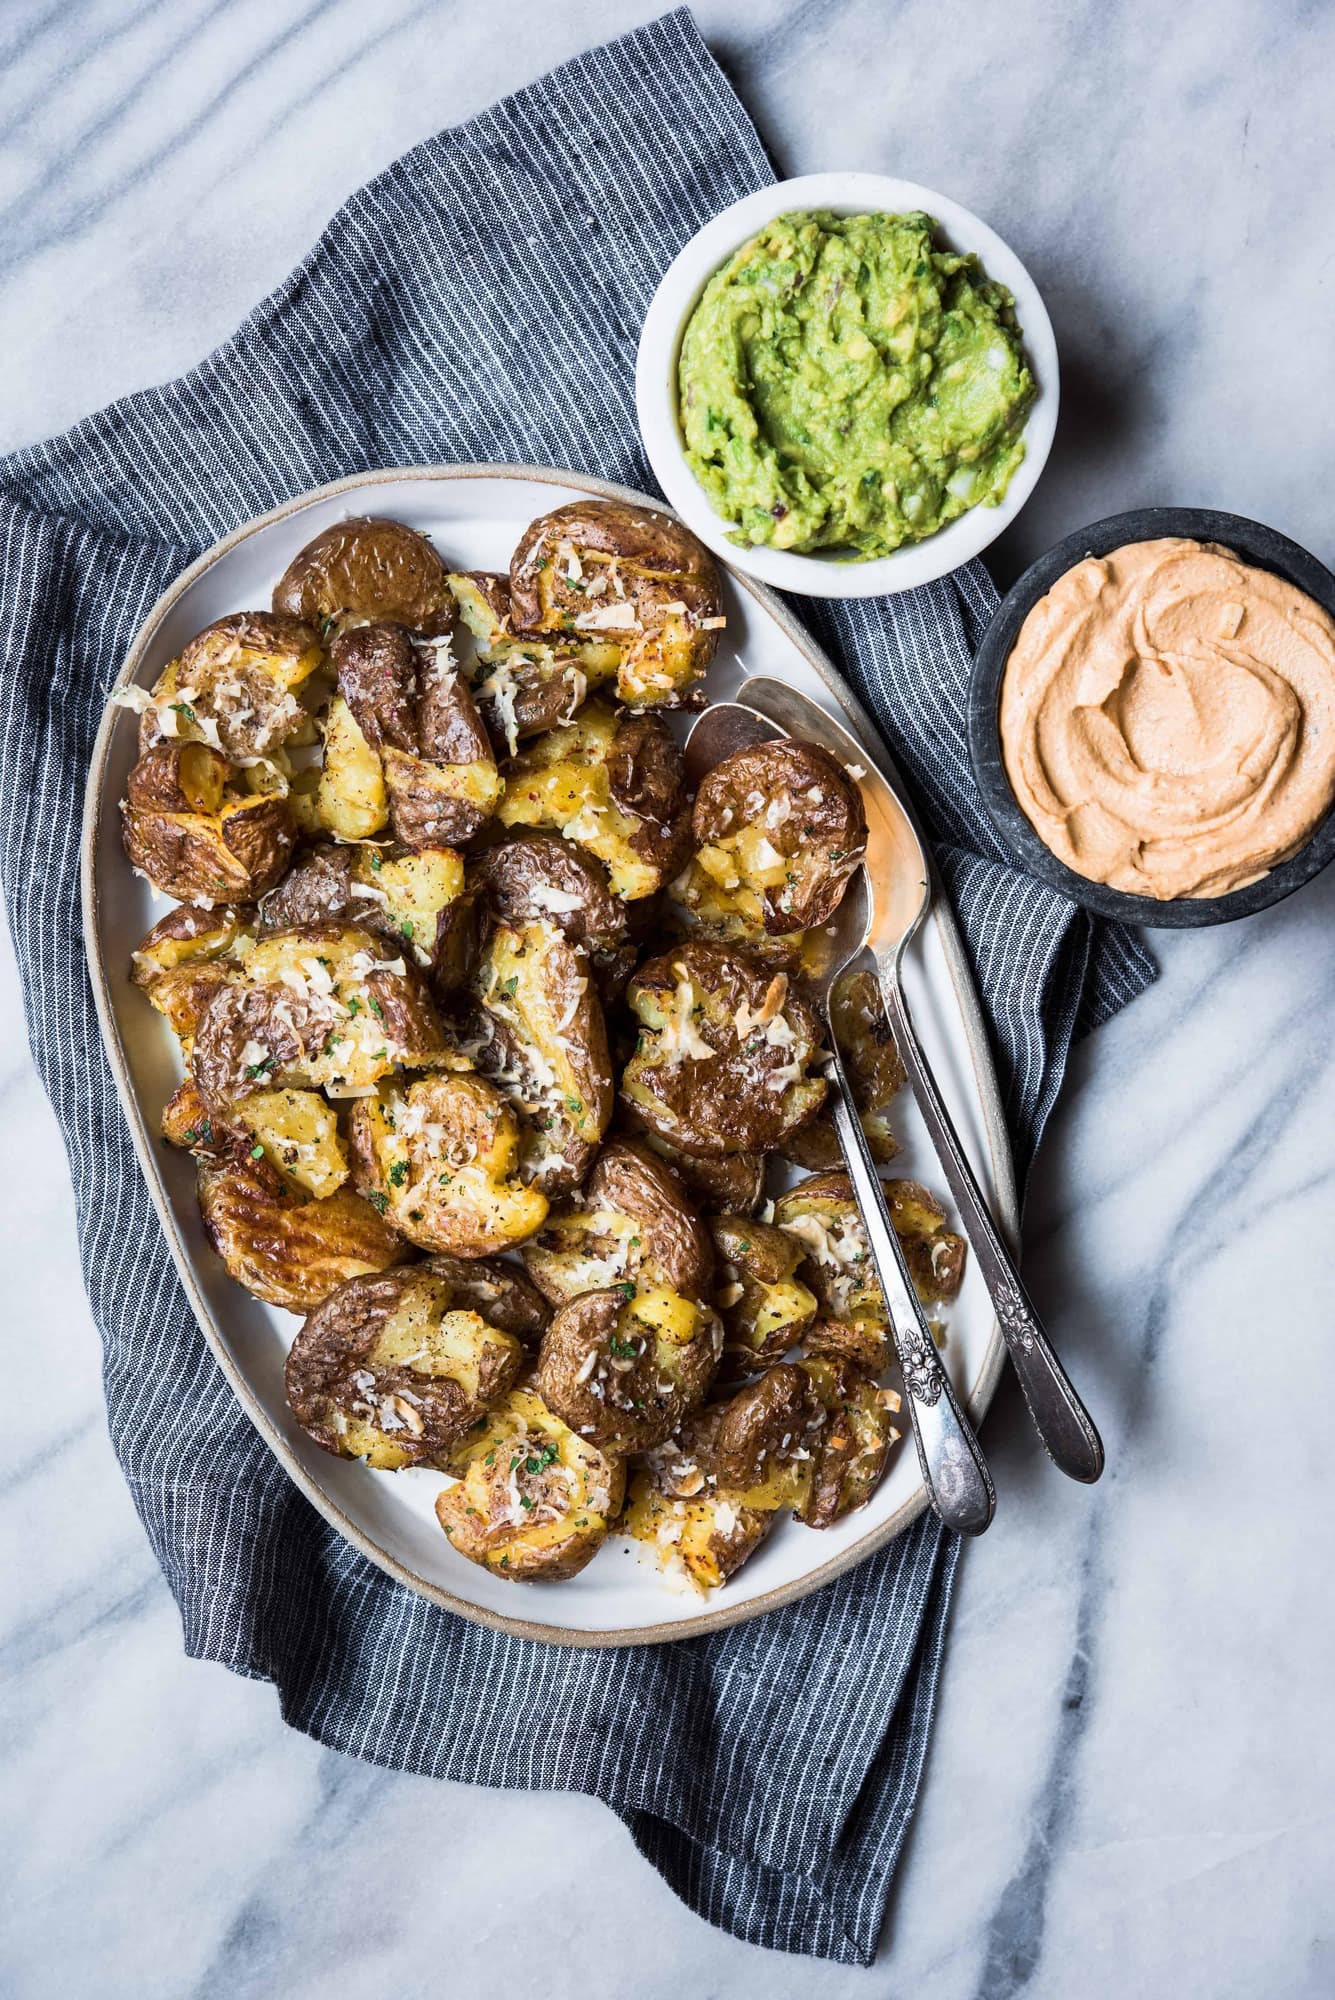 Platter of crispy smashed potatoes on marble background with guacamole and queso dip